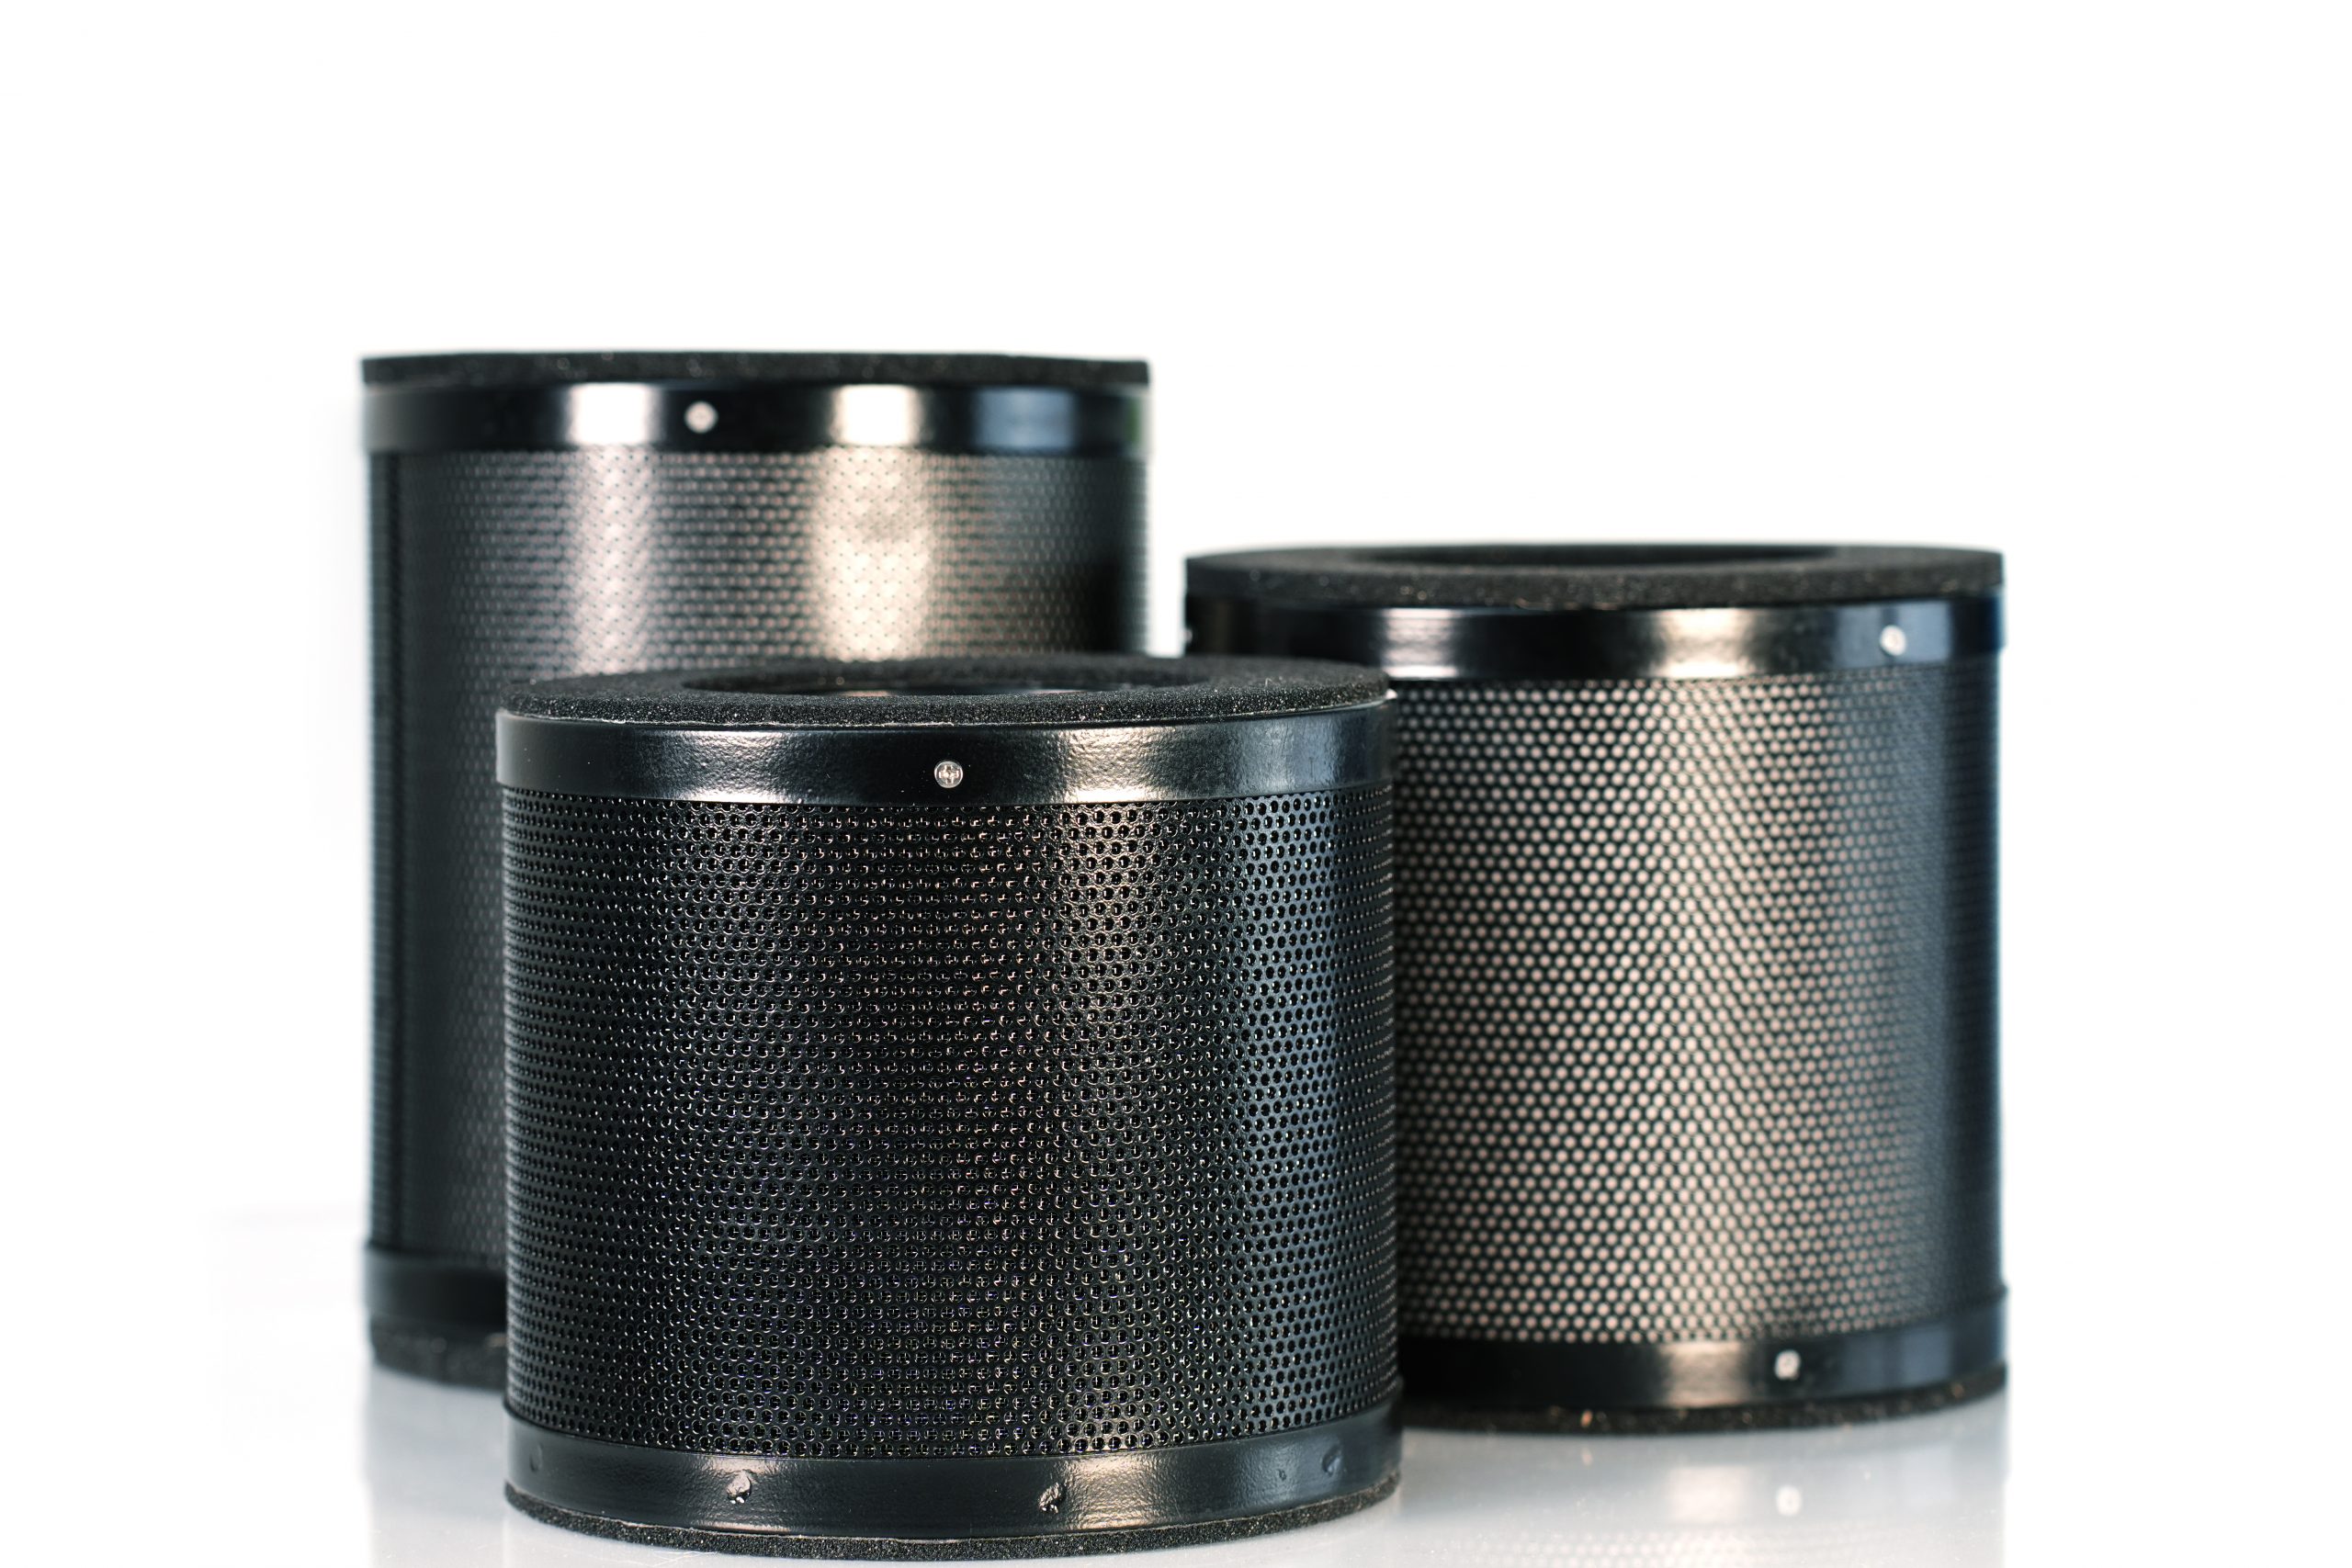  The cylindrical cartridge filter for 3D printing professional